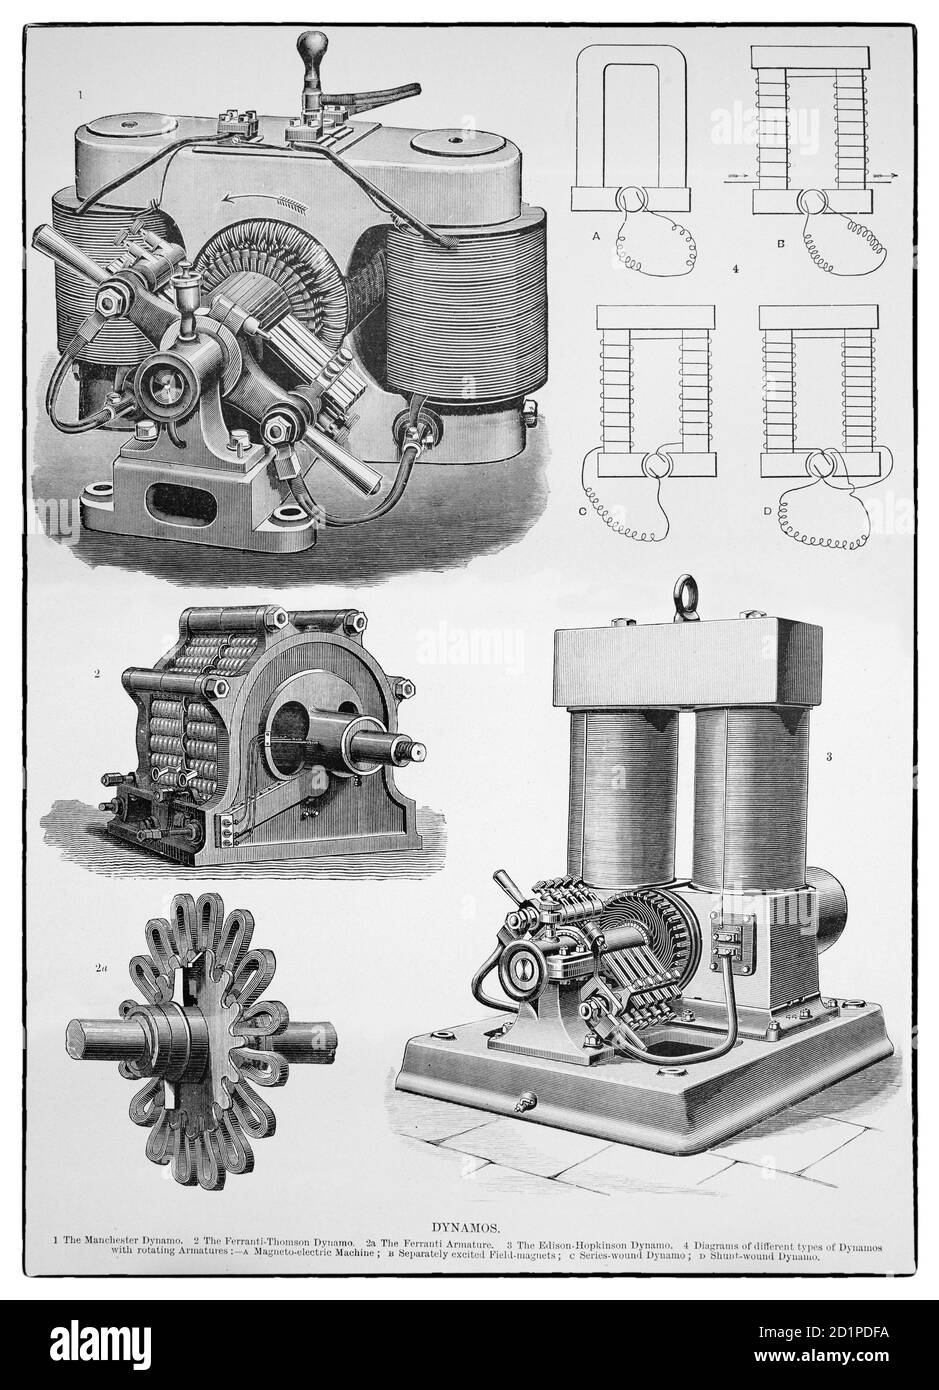 A 19th Century collage of Various dynamos used for converting mechanical motion into electricity, generating direct current using a commutator. Dynamos were the first electrical generators capable of delivering power for industry, and the foundation upon which many other later electric-power conversion devices were based, including the electric motor, the alternating-current alternator, and the rotary converter. Stock Photo